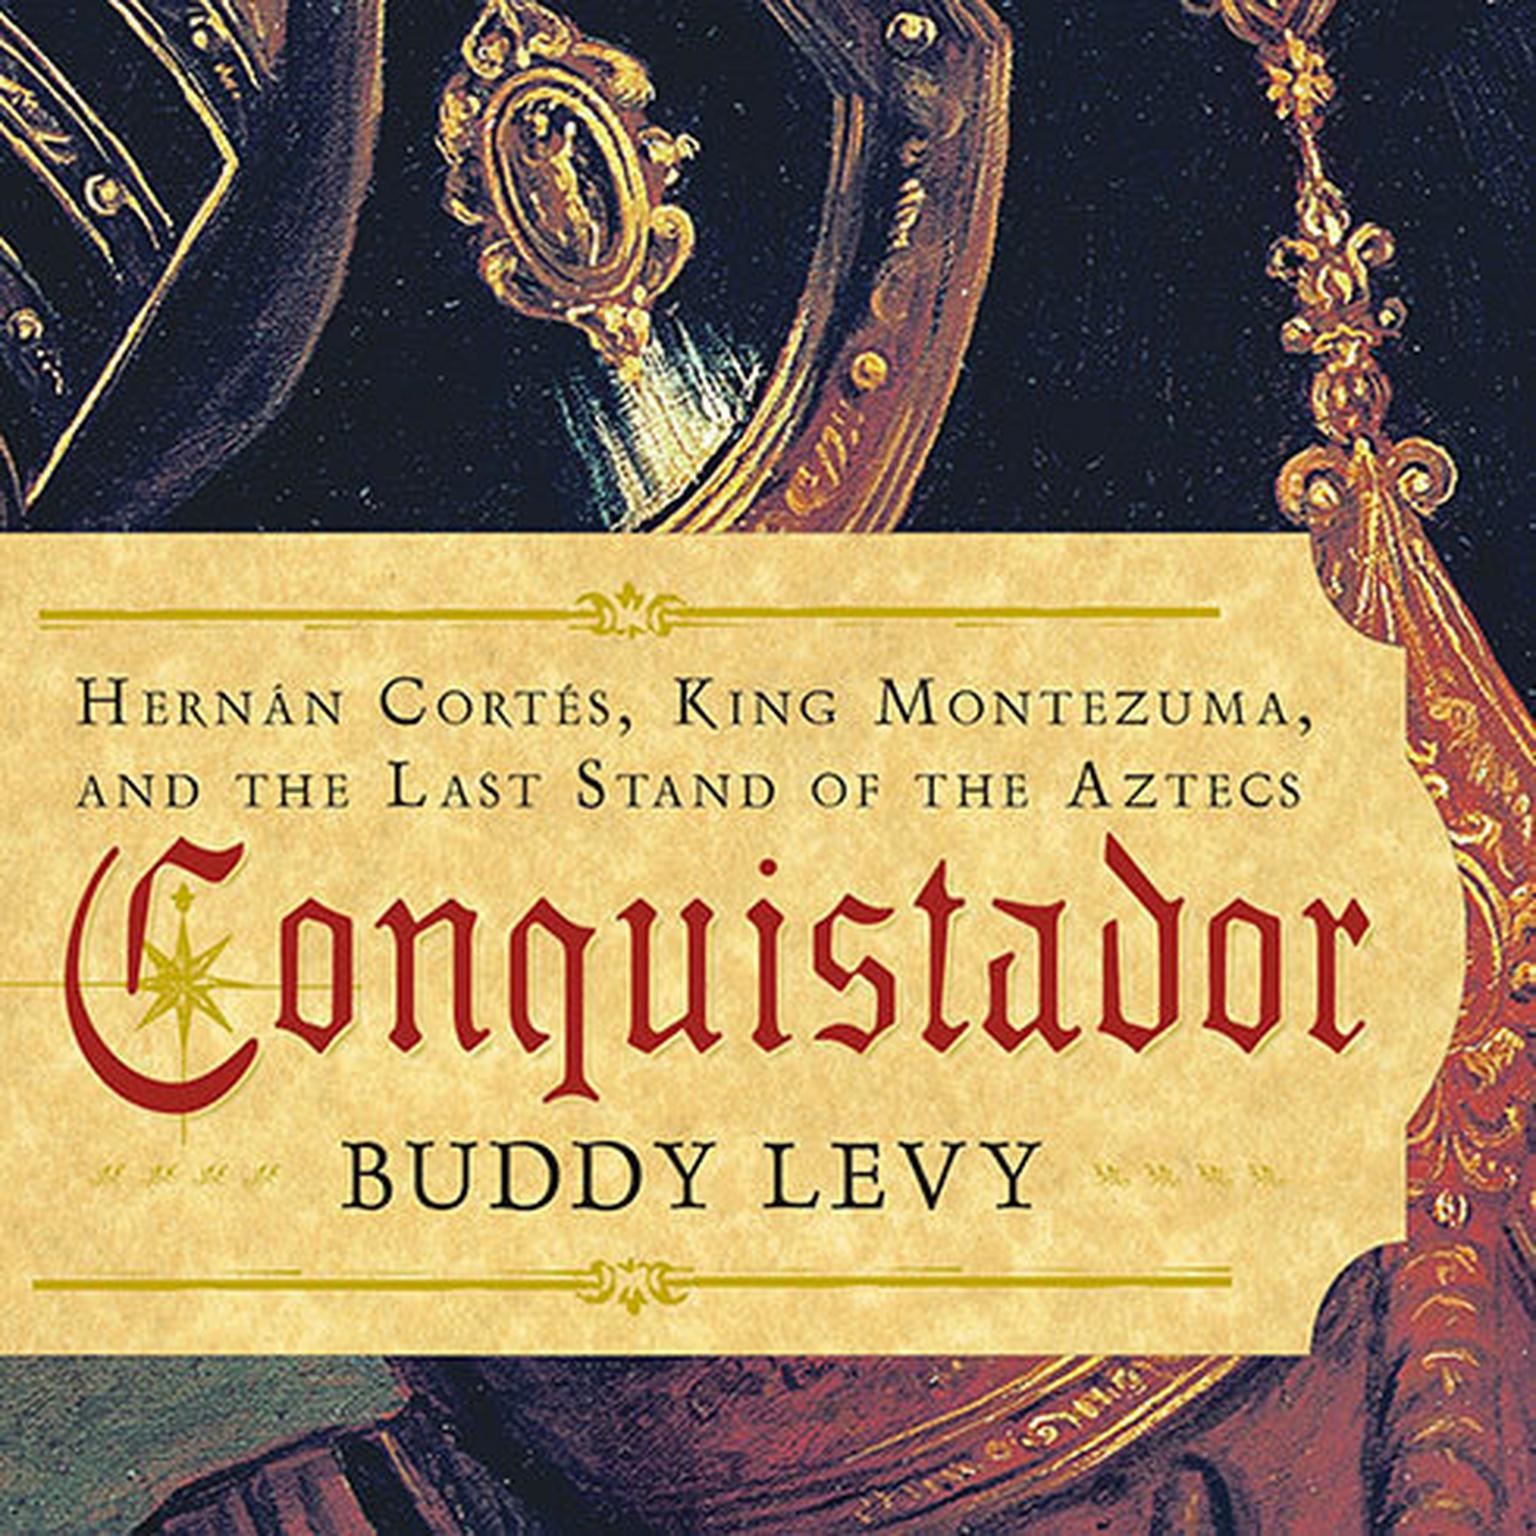 Conquistador: Hernan Cortes, King Montezuma, and the Last Stand of the Aztecs Audiobook, by Buddy Levy